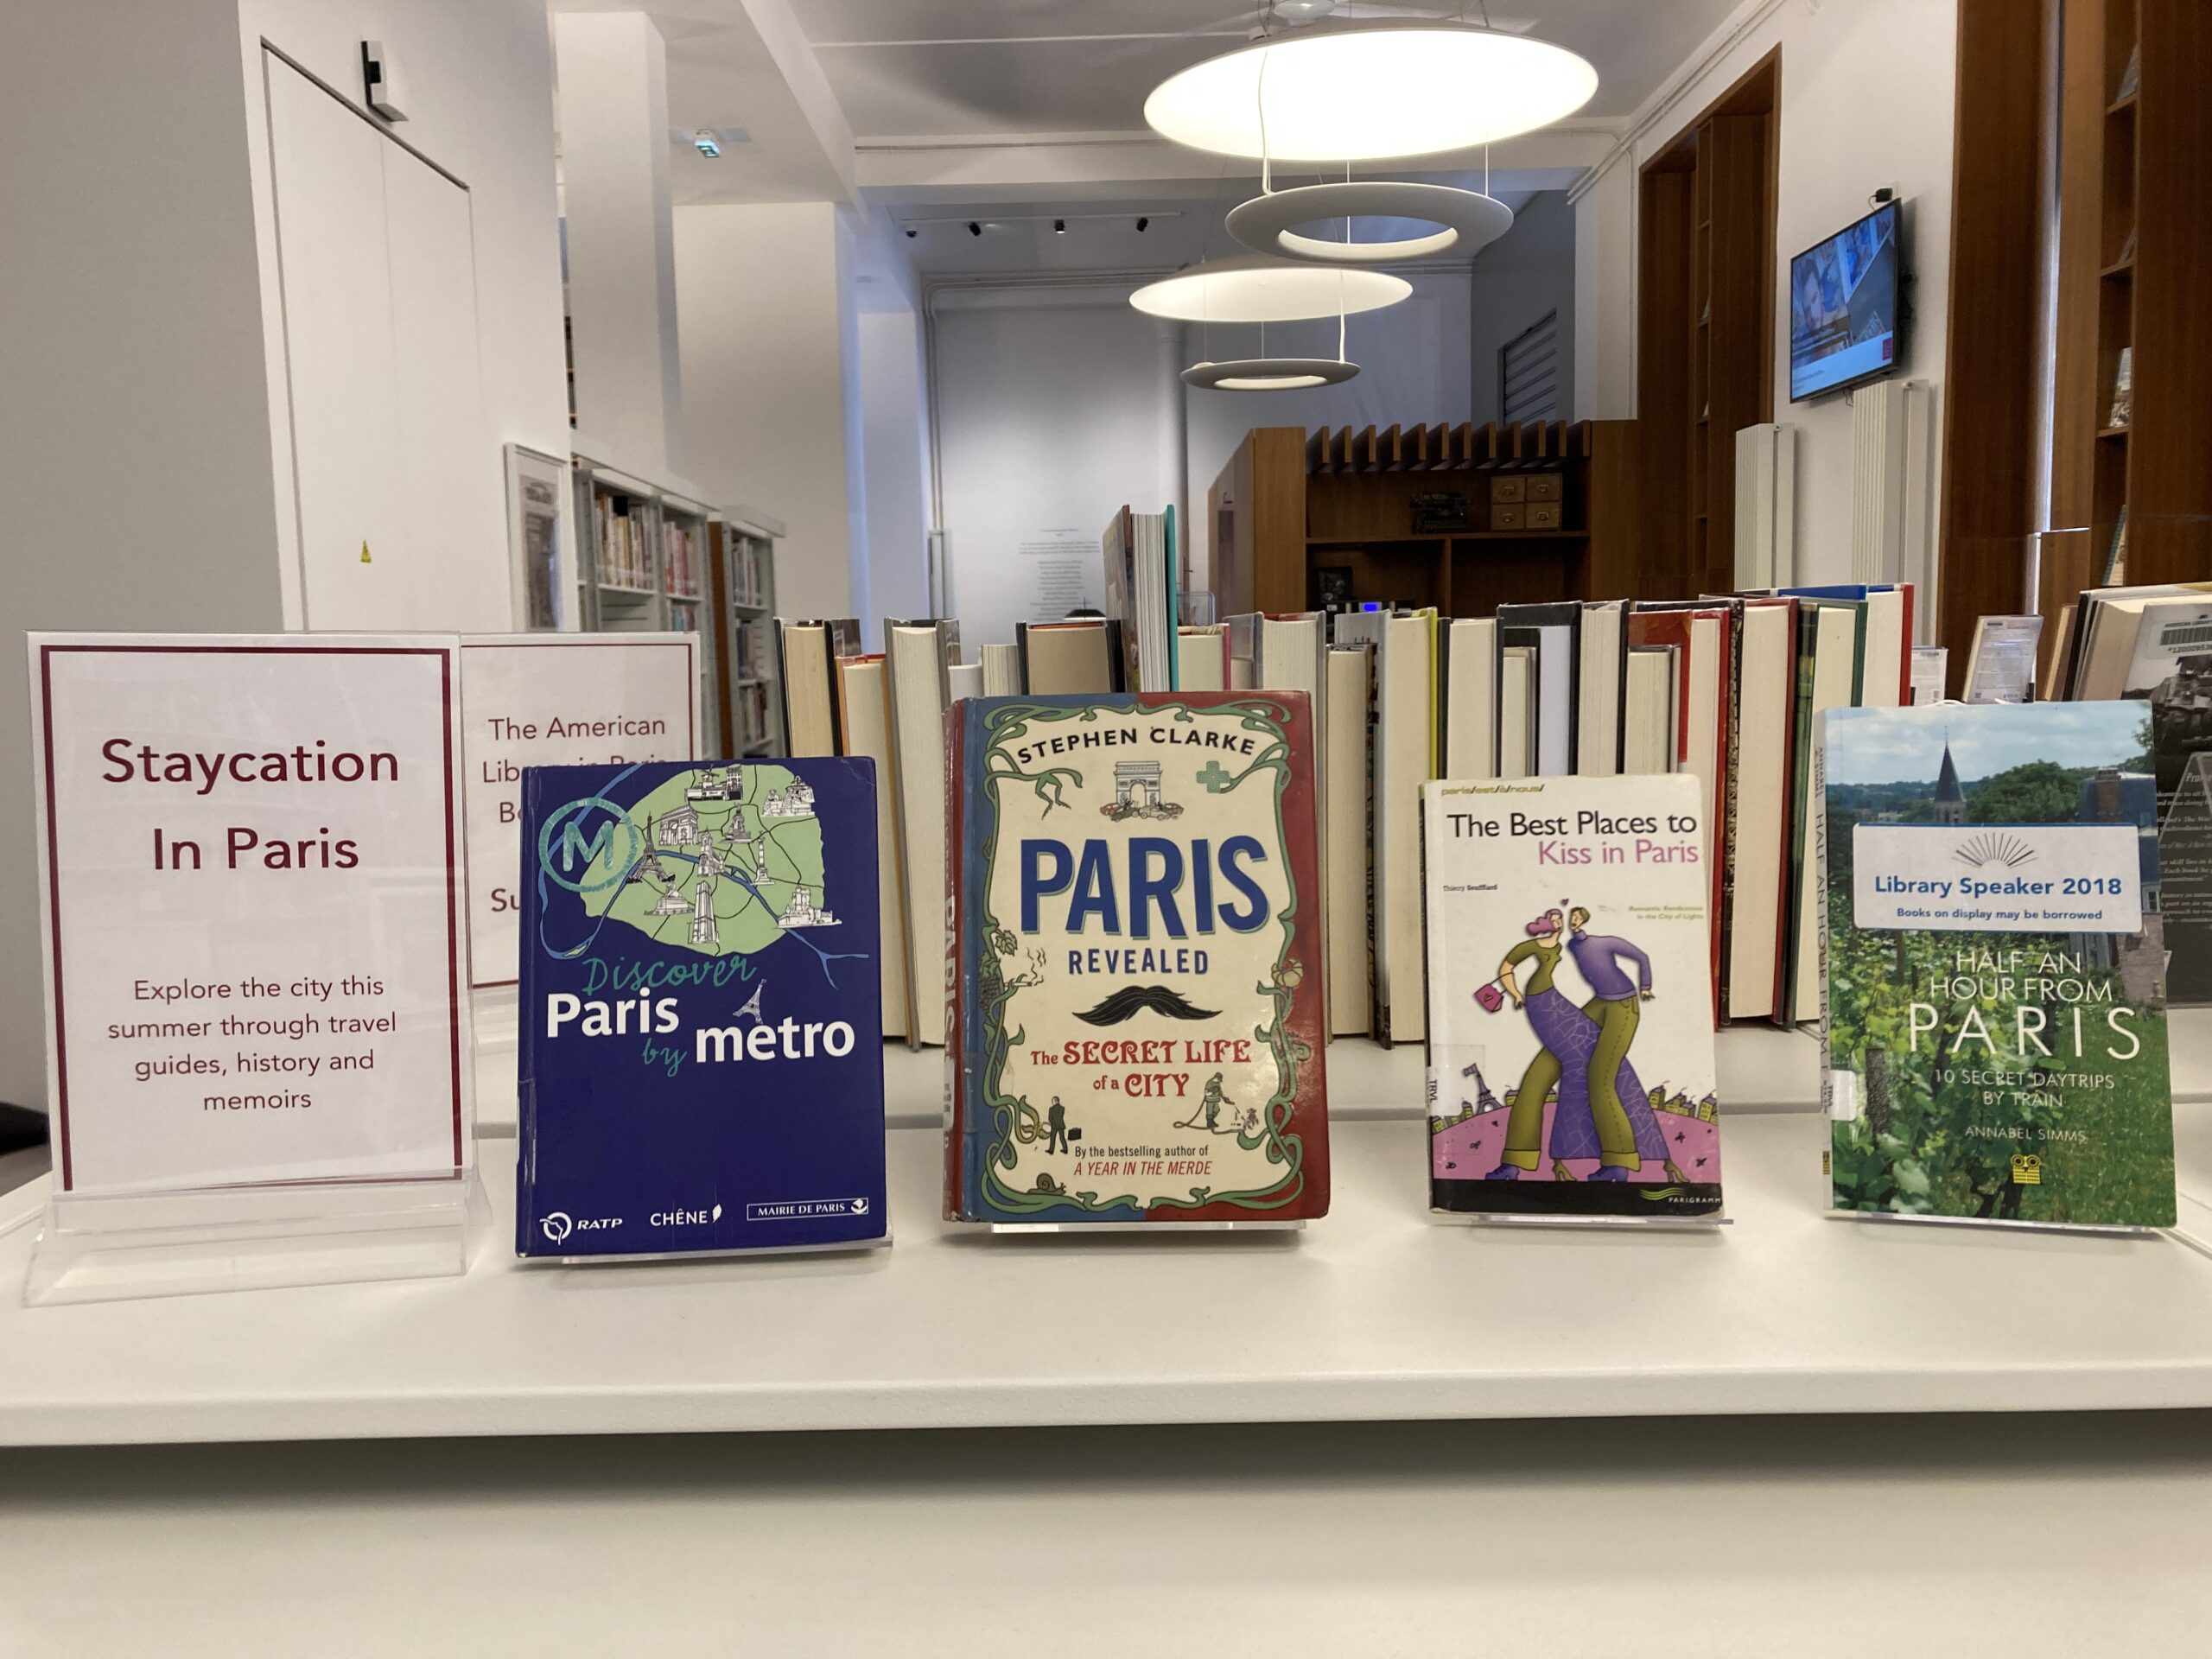 Display of books staycation in Paris travelguide